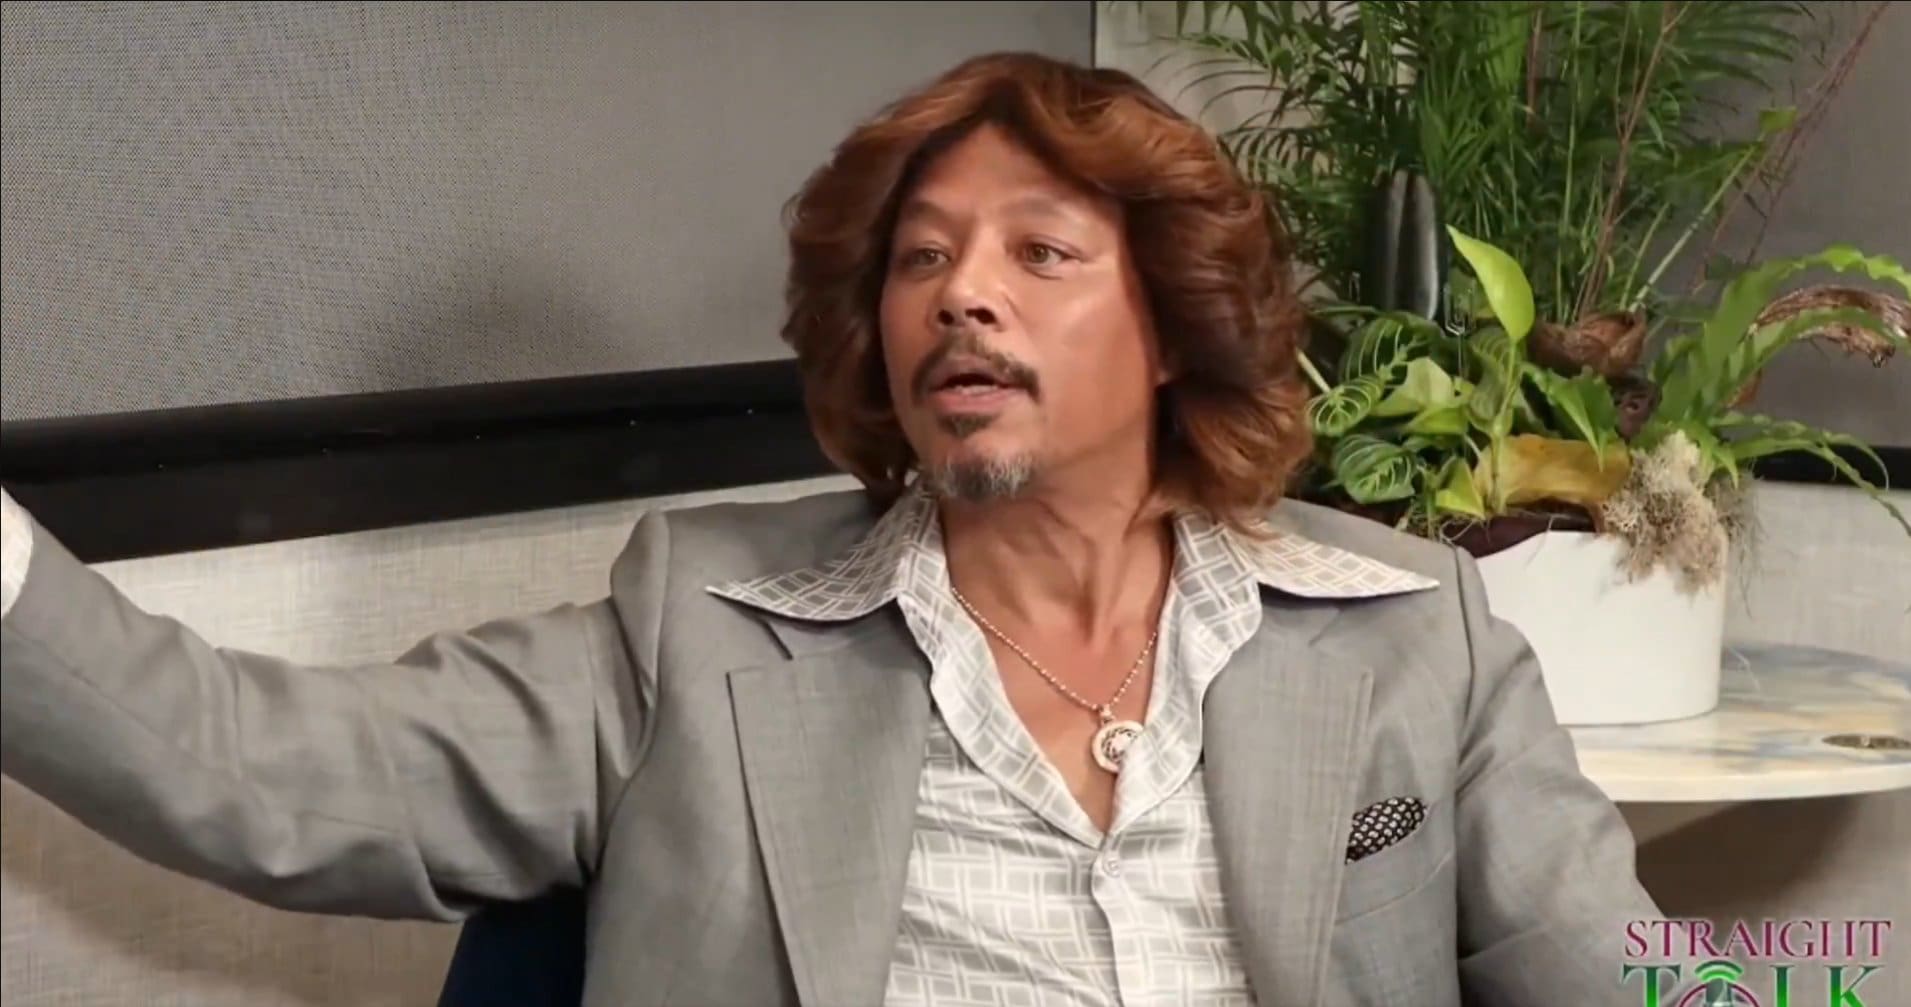 Terrance Howard Talks About His Lawsuit Against CAA [Video]